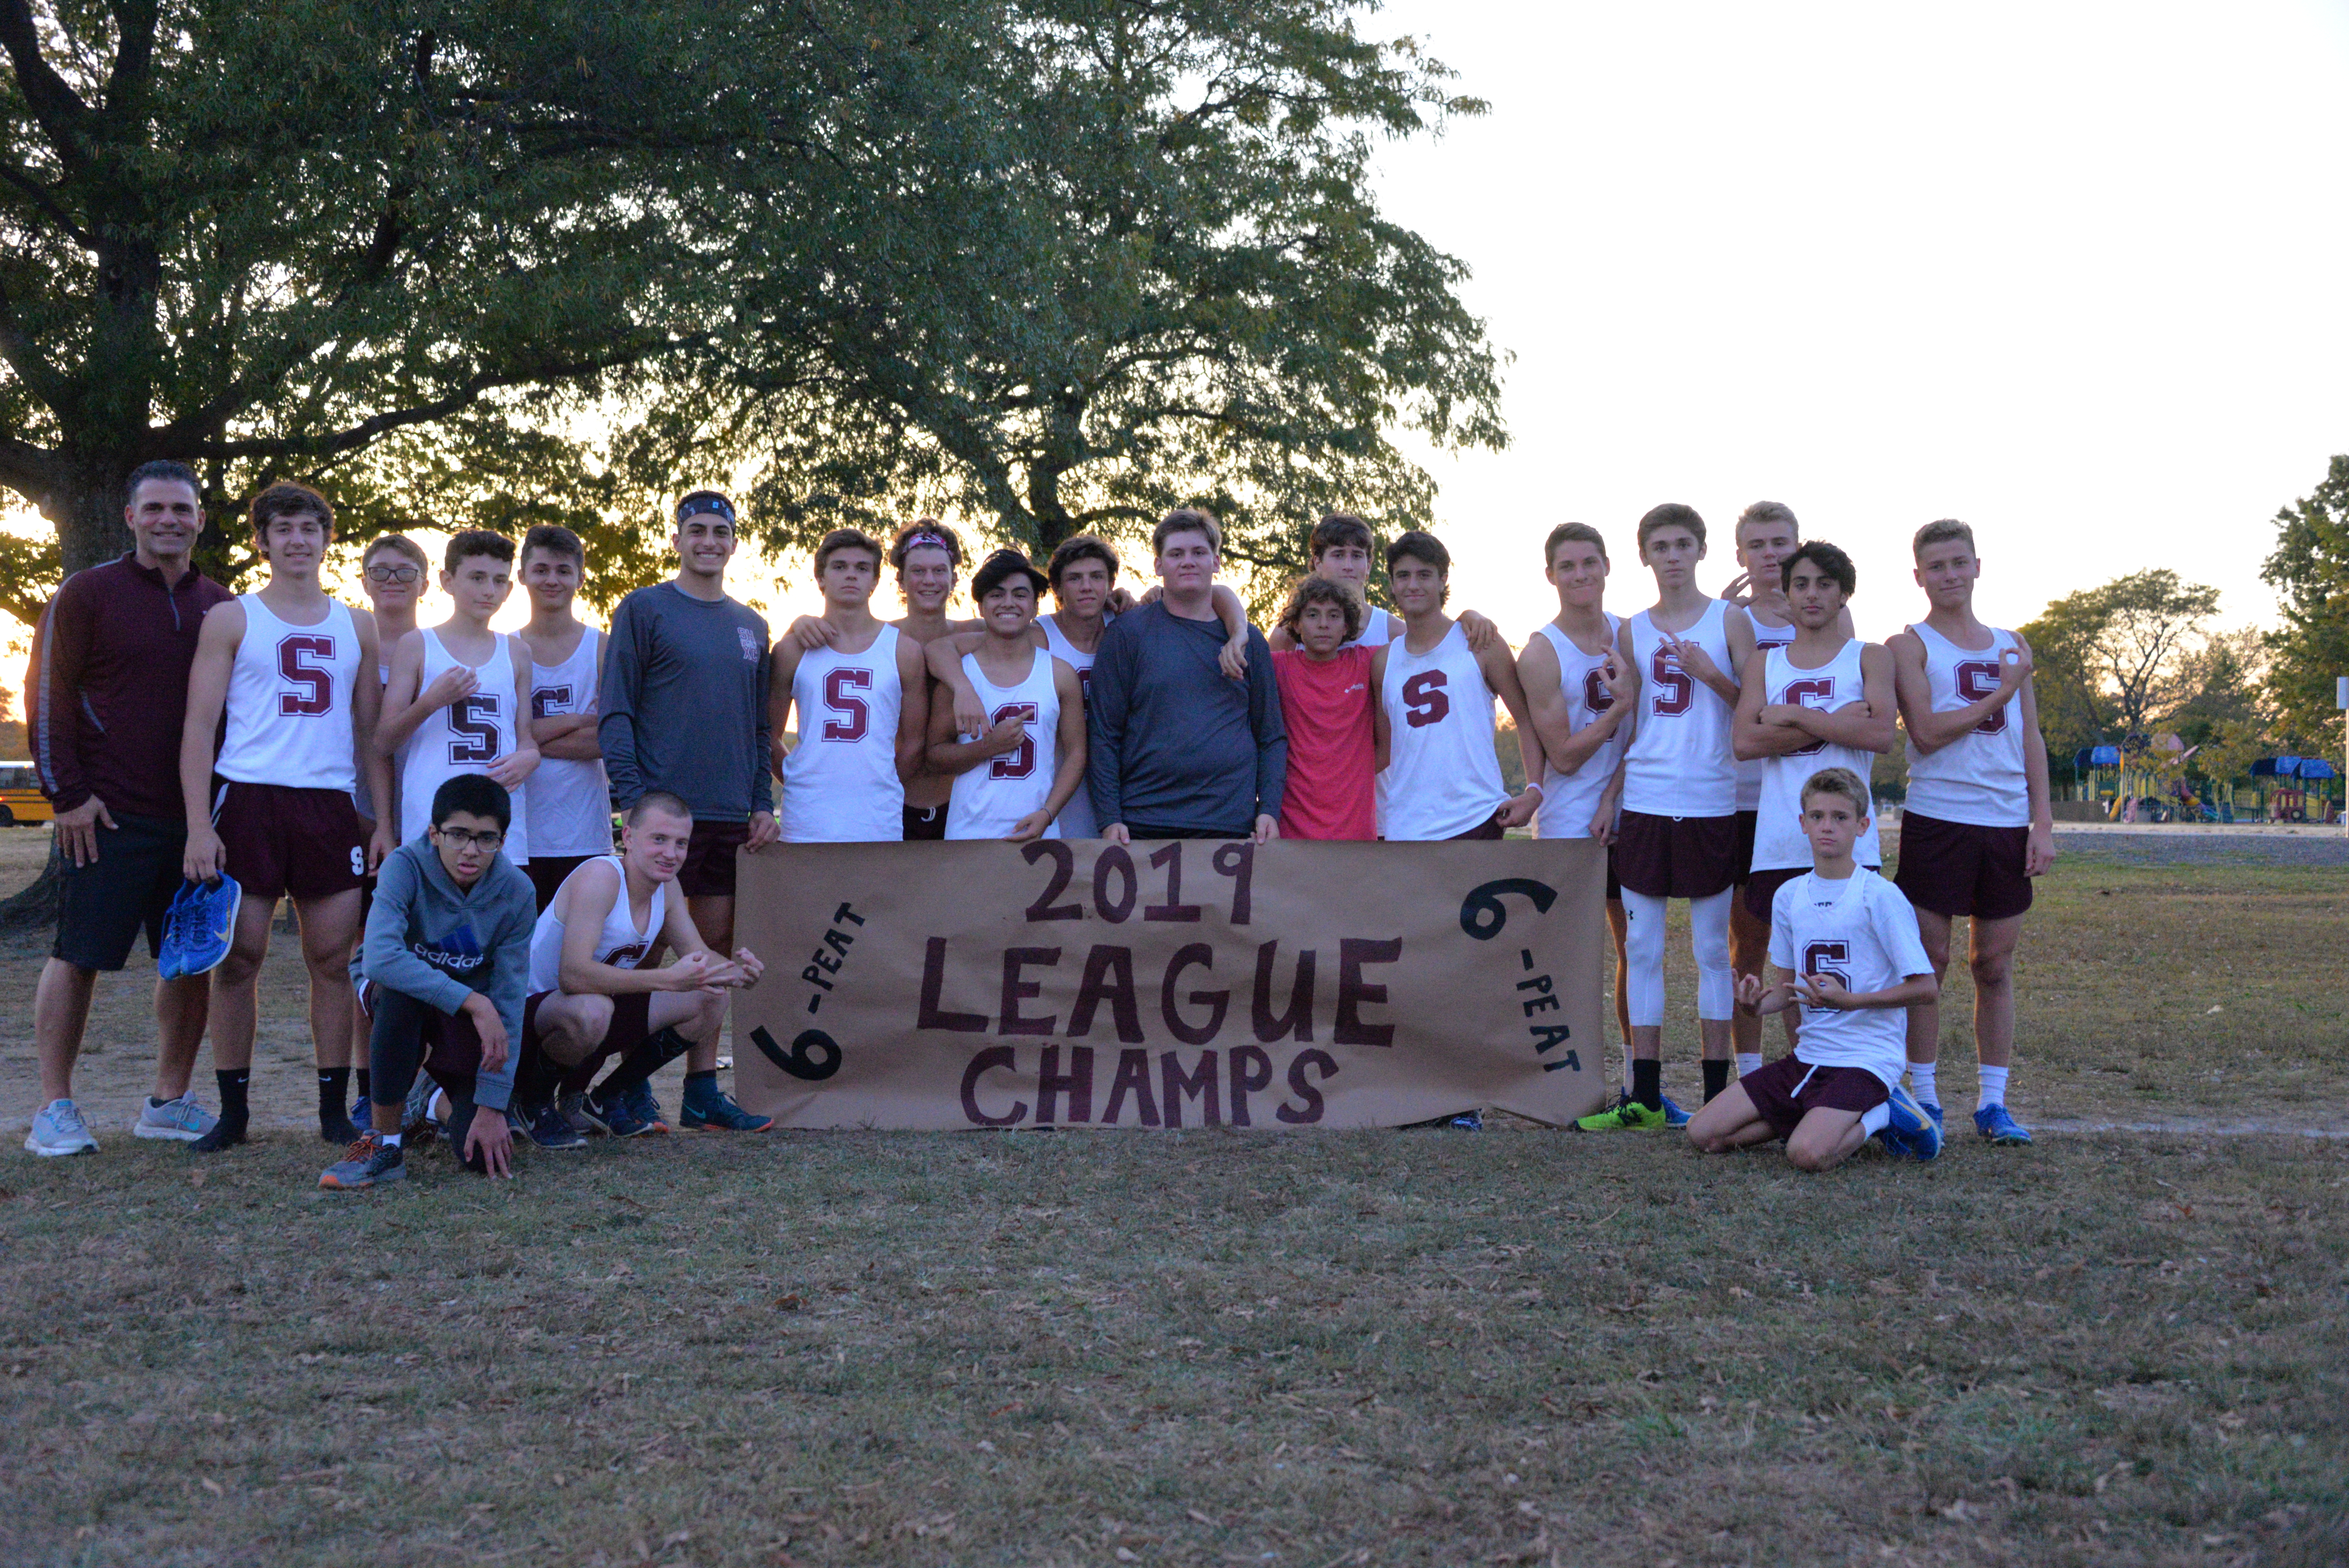 The Southampton boys cross country team won its sixth consecutive league title on Tuesday with its victory over Bayport/Blue Point.